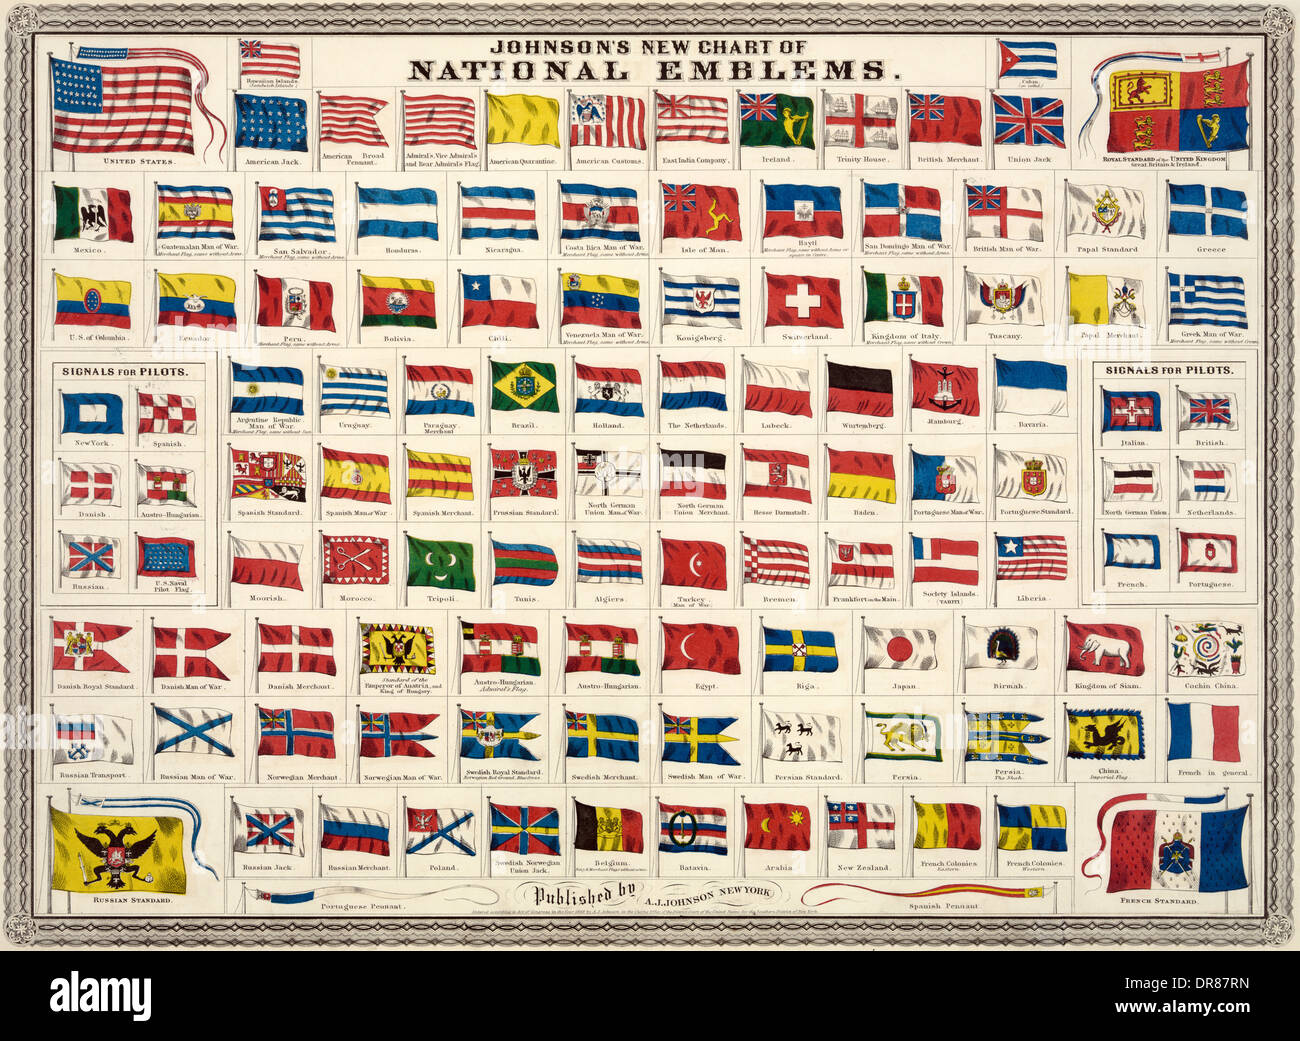 Johnson's new chart of national emblems published by A.J. Johnson, New York USA 1868 showing national flags, ensigns and signals Stock Photo